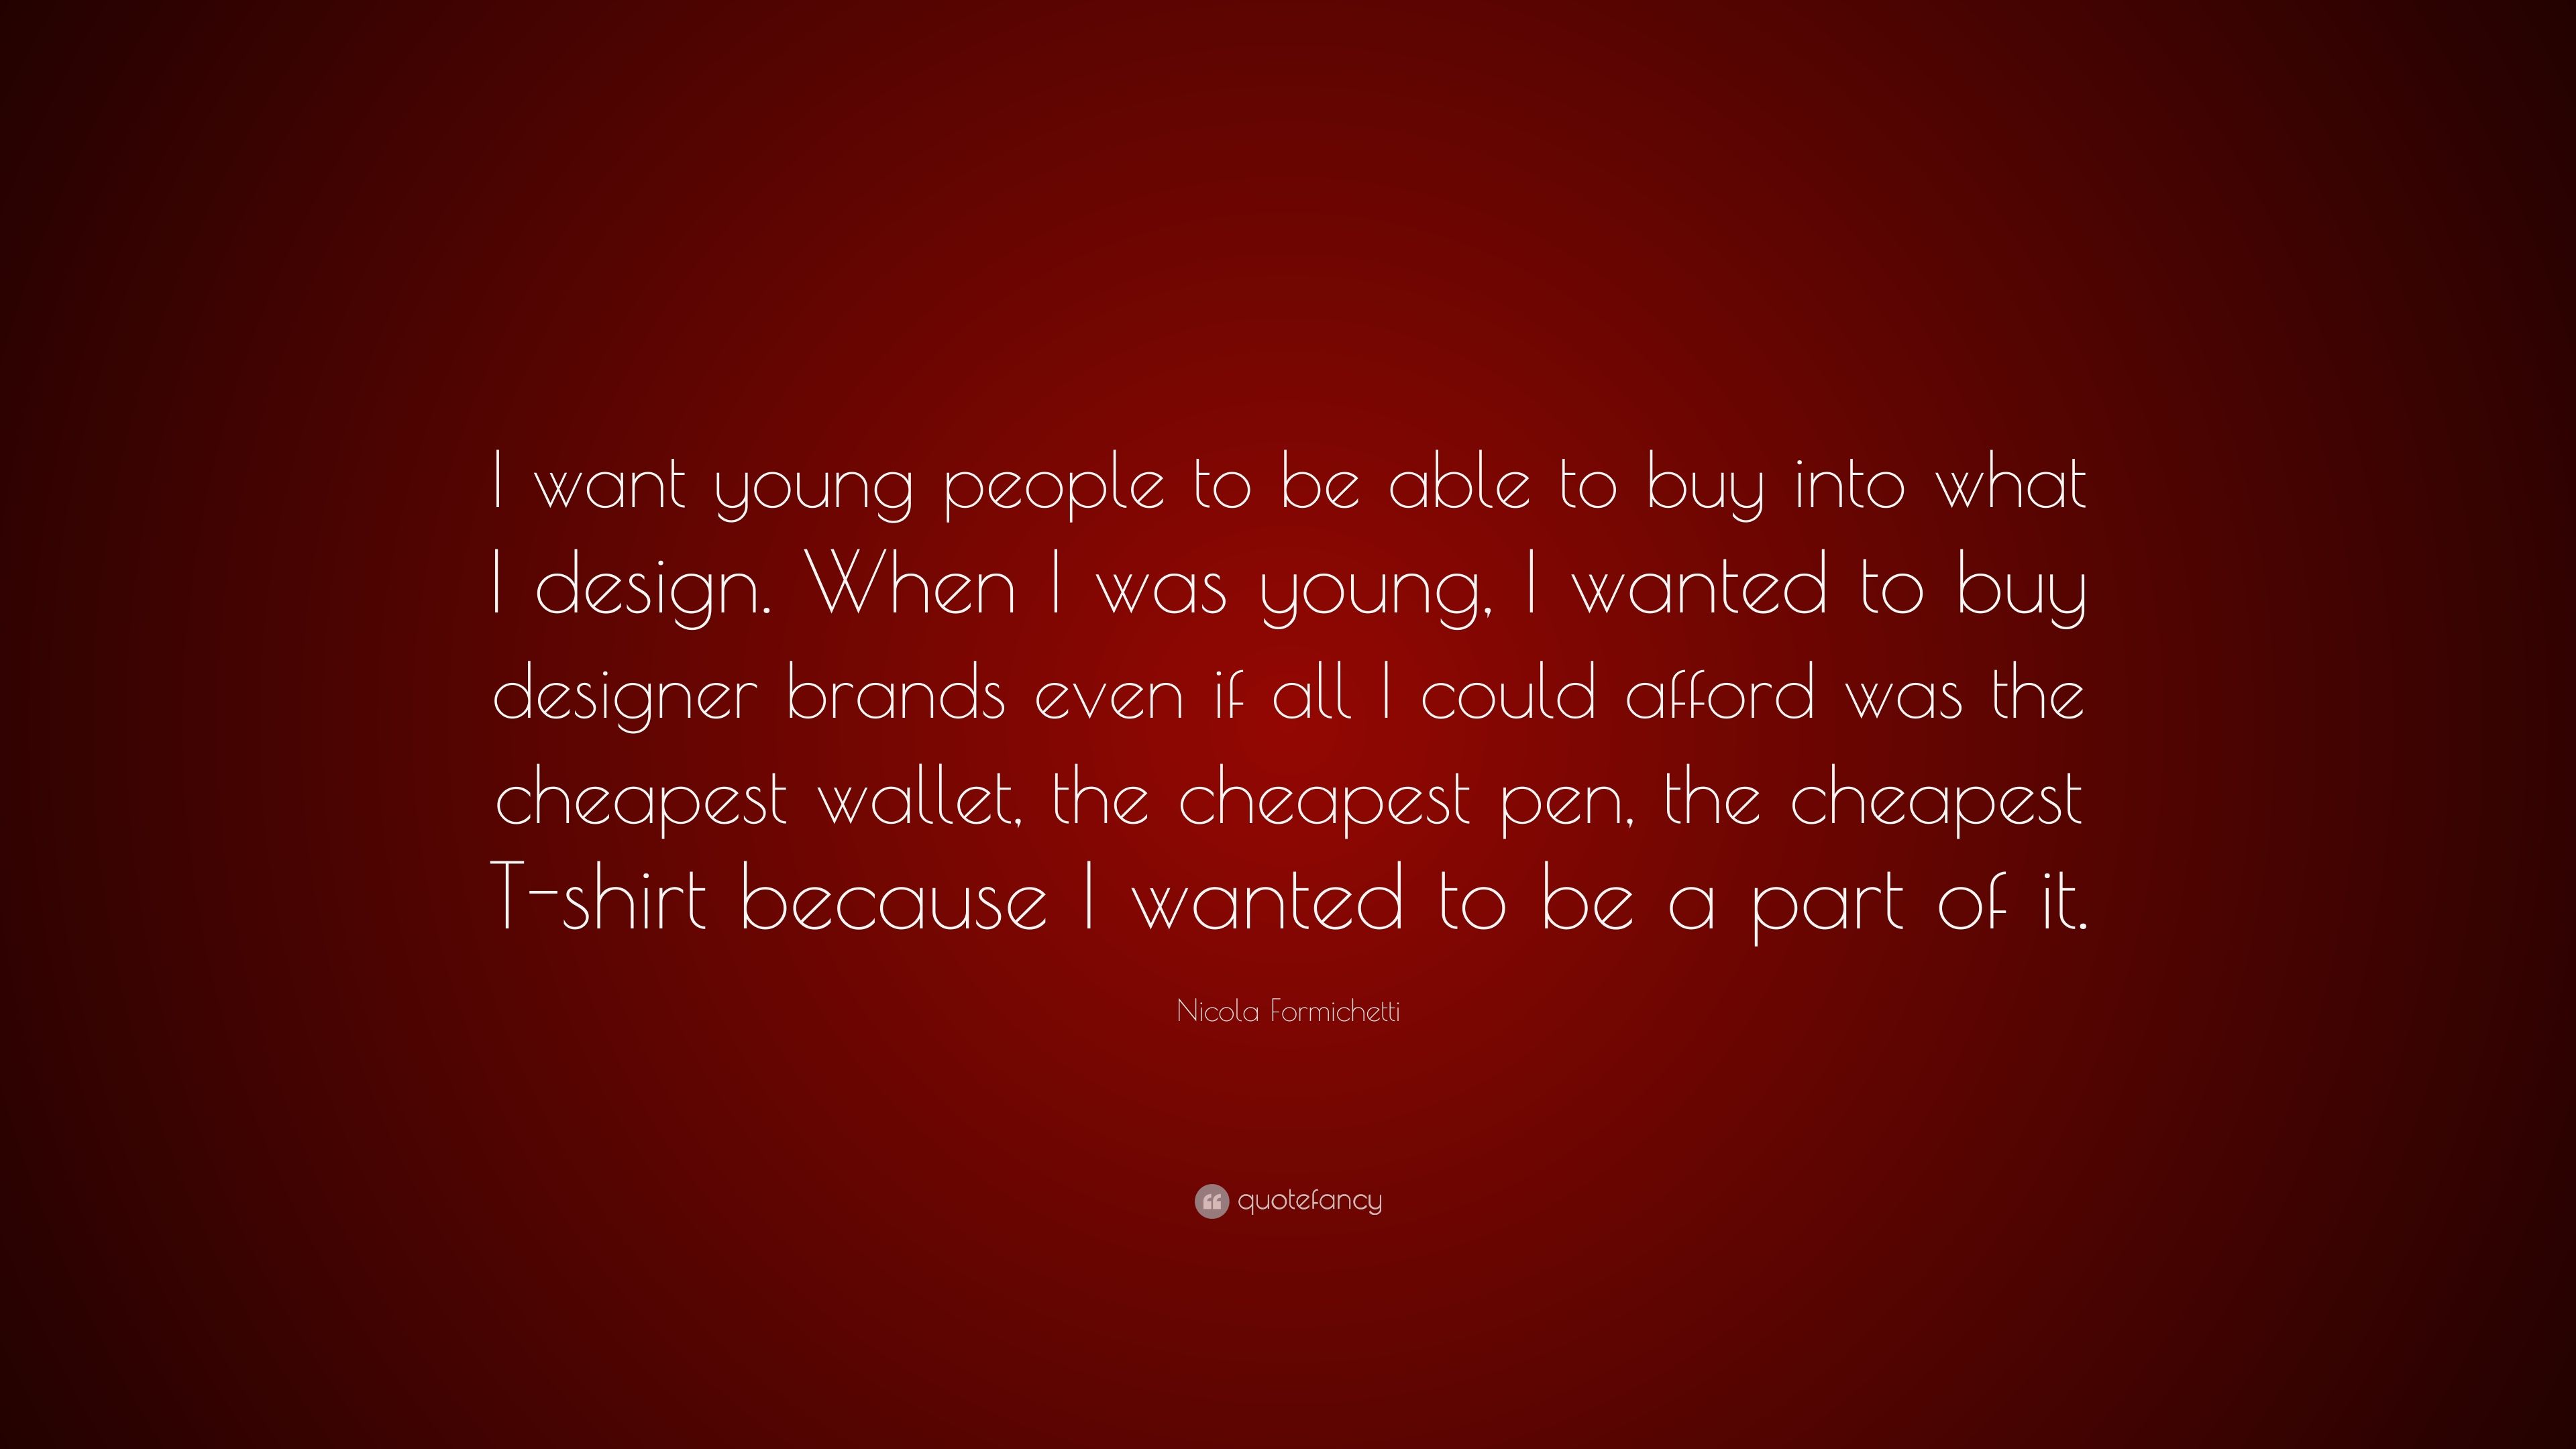 Nicola Formichetti Quote: “I want young people to be able to buy